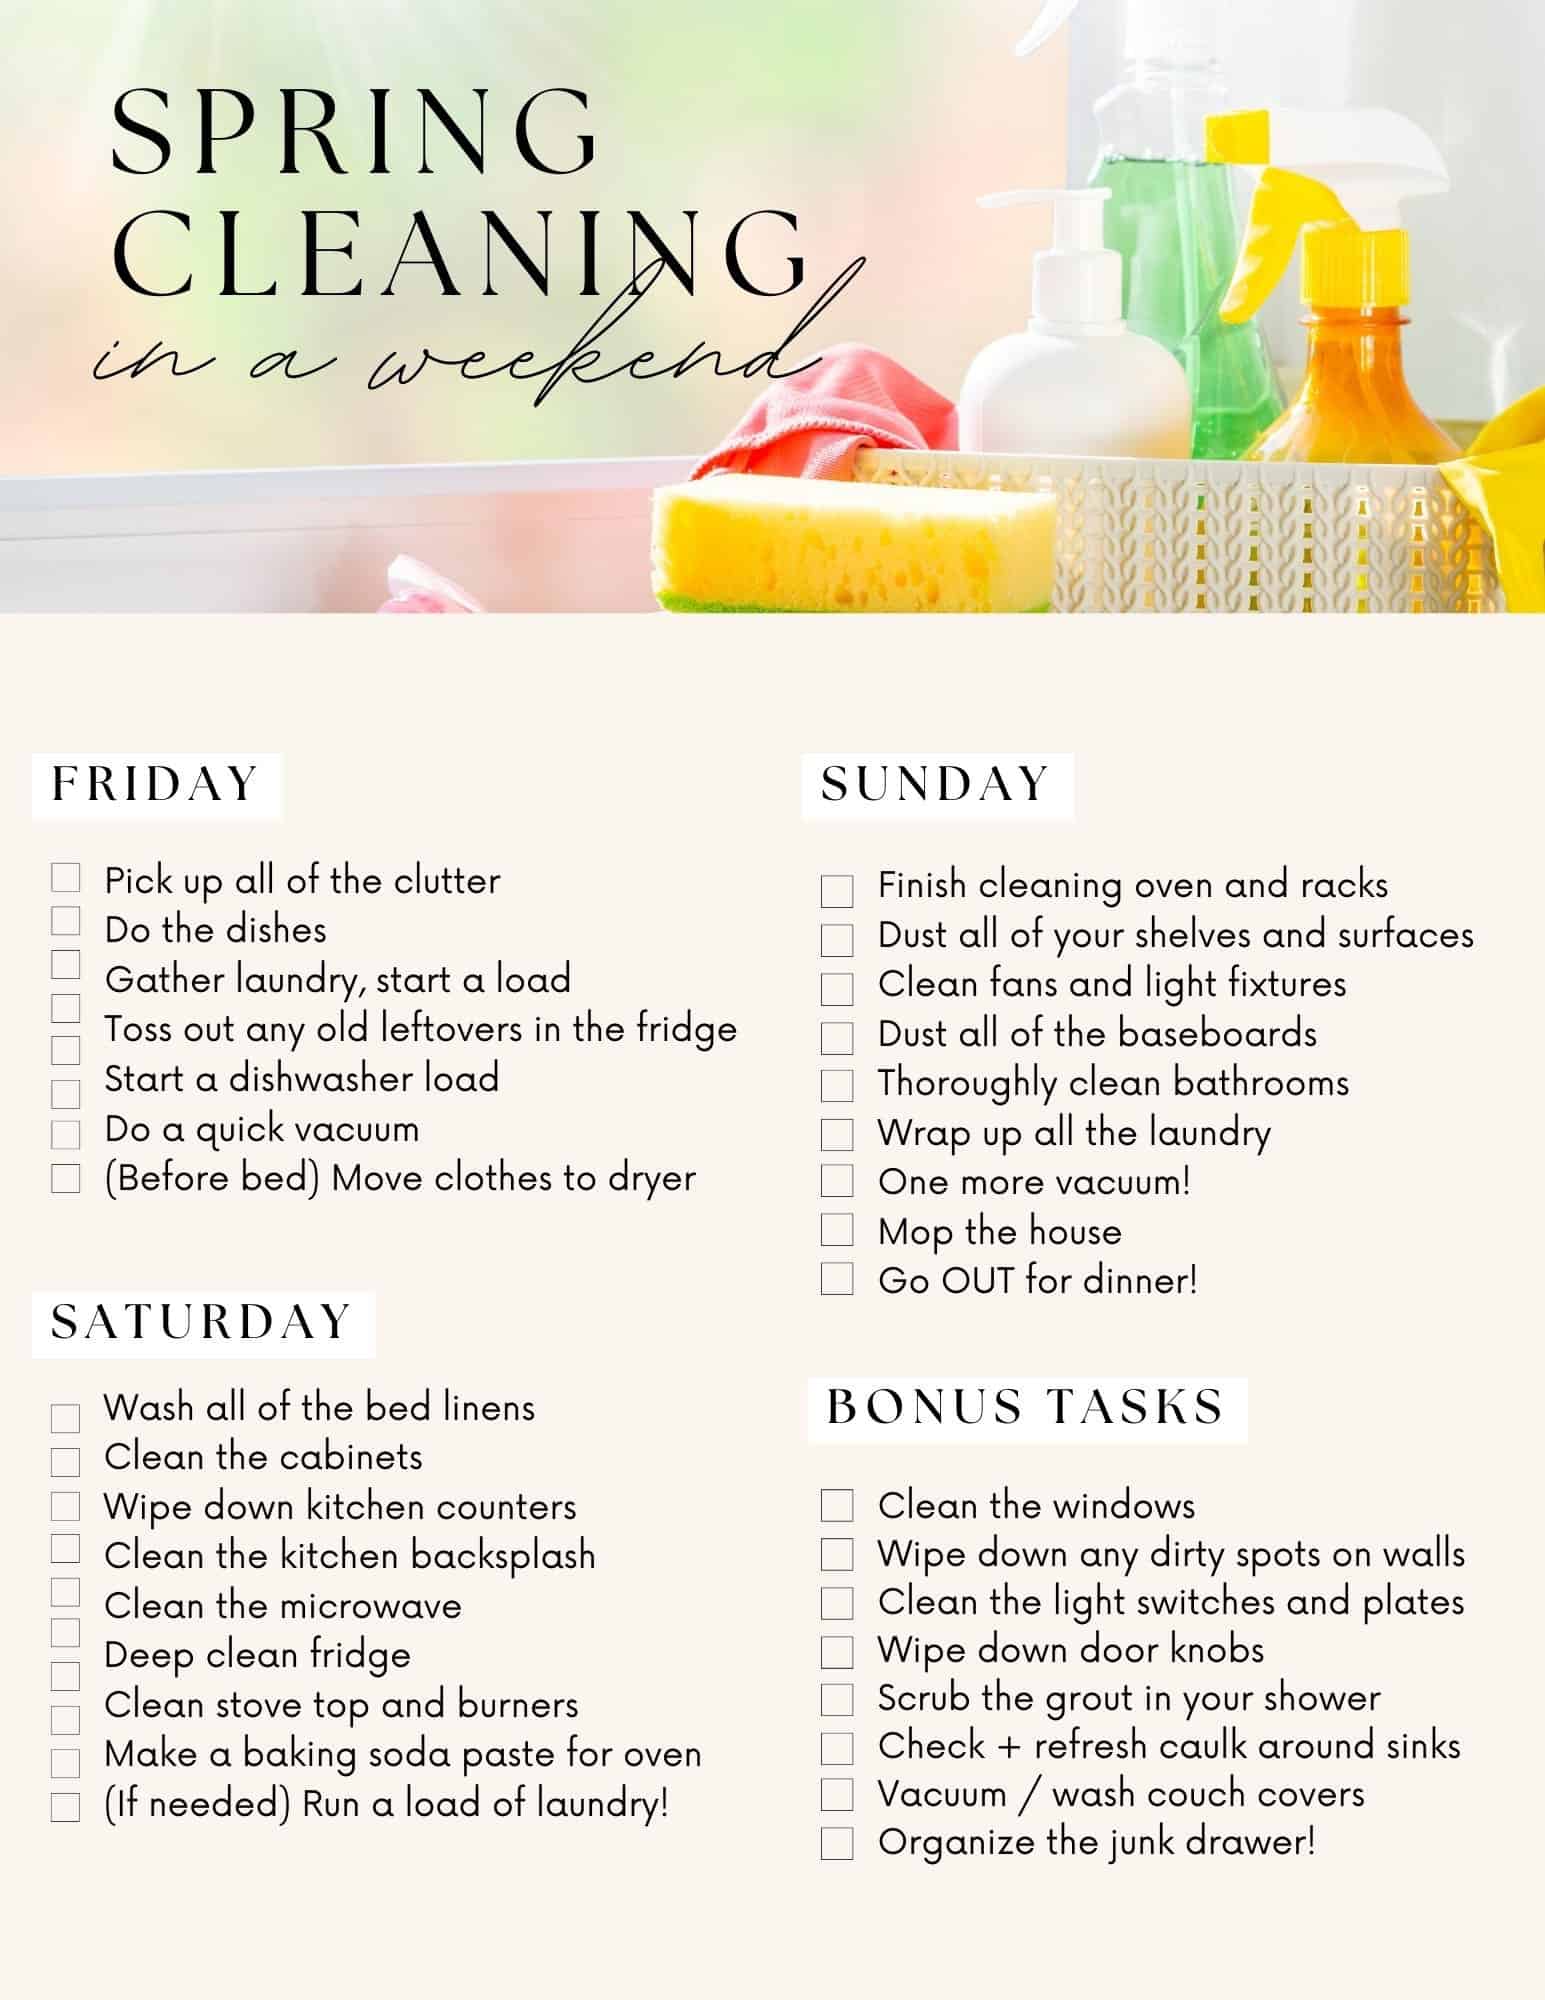 checklist for spring cleaning in a weekend 